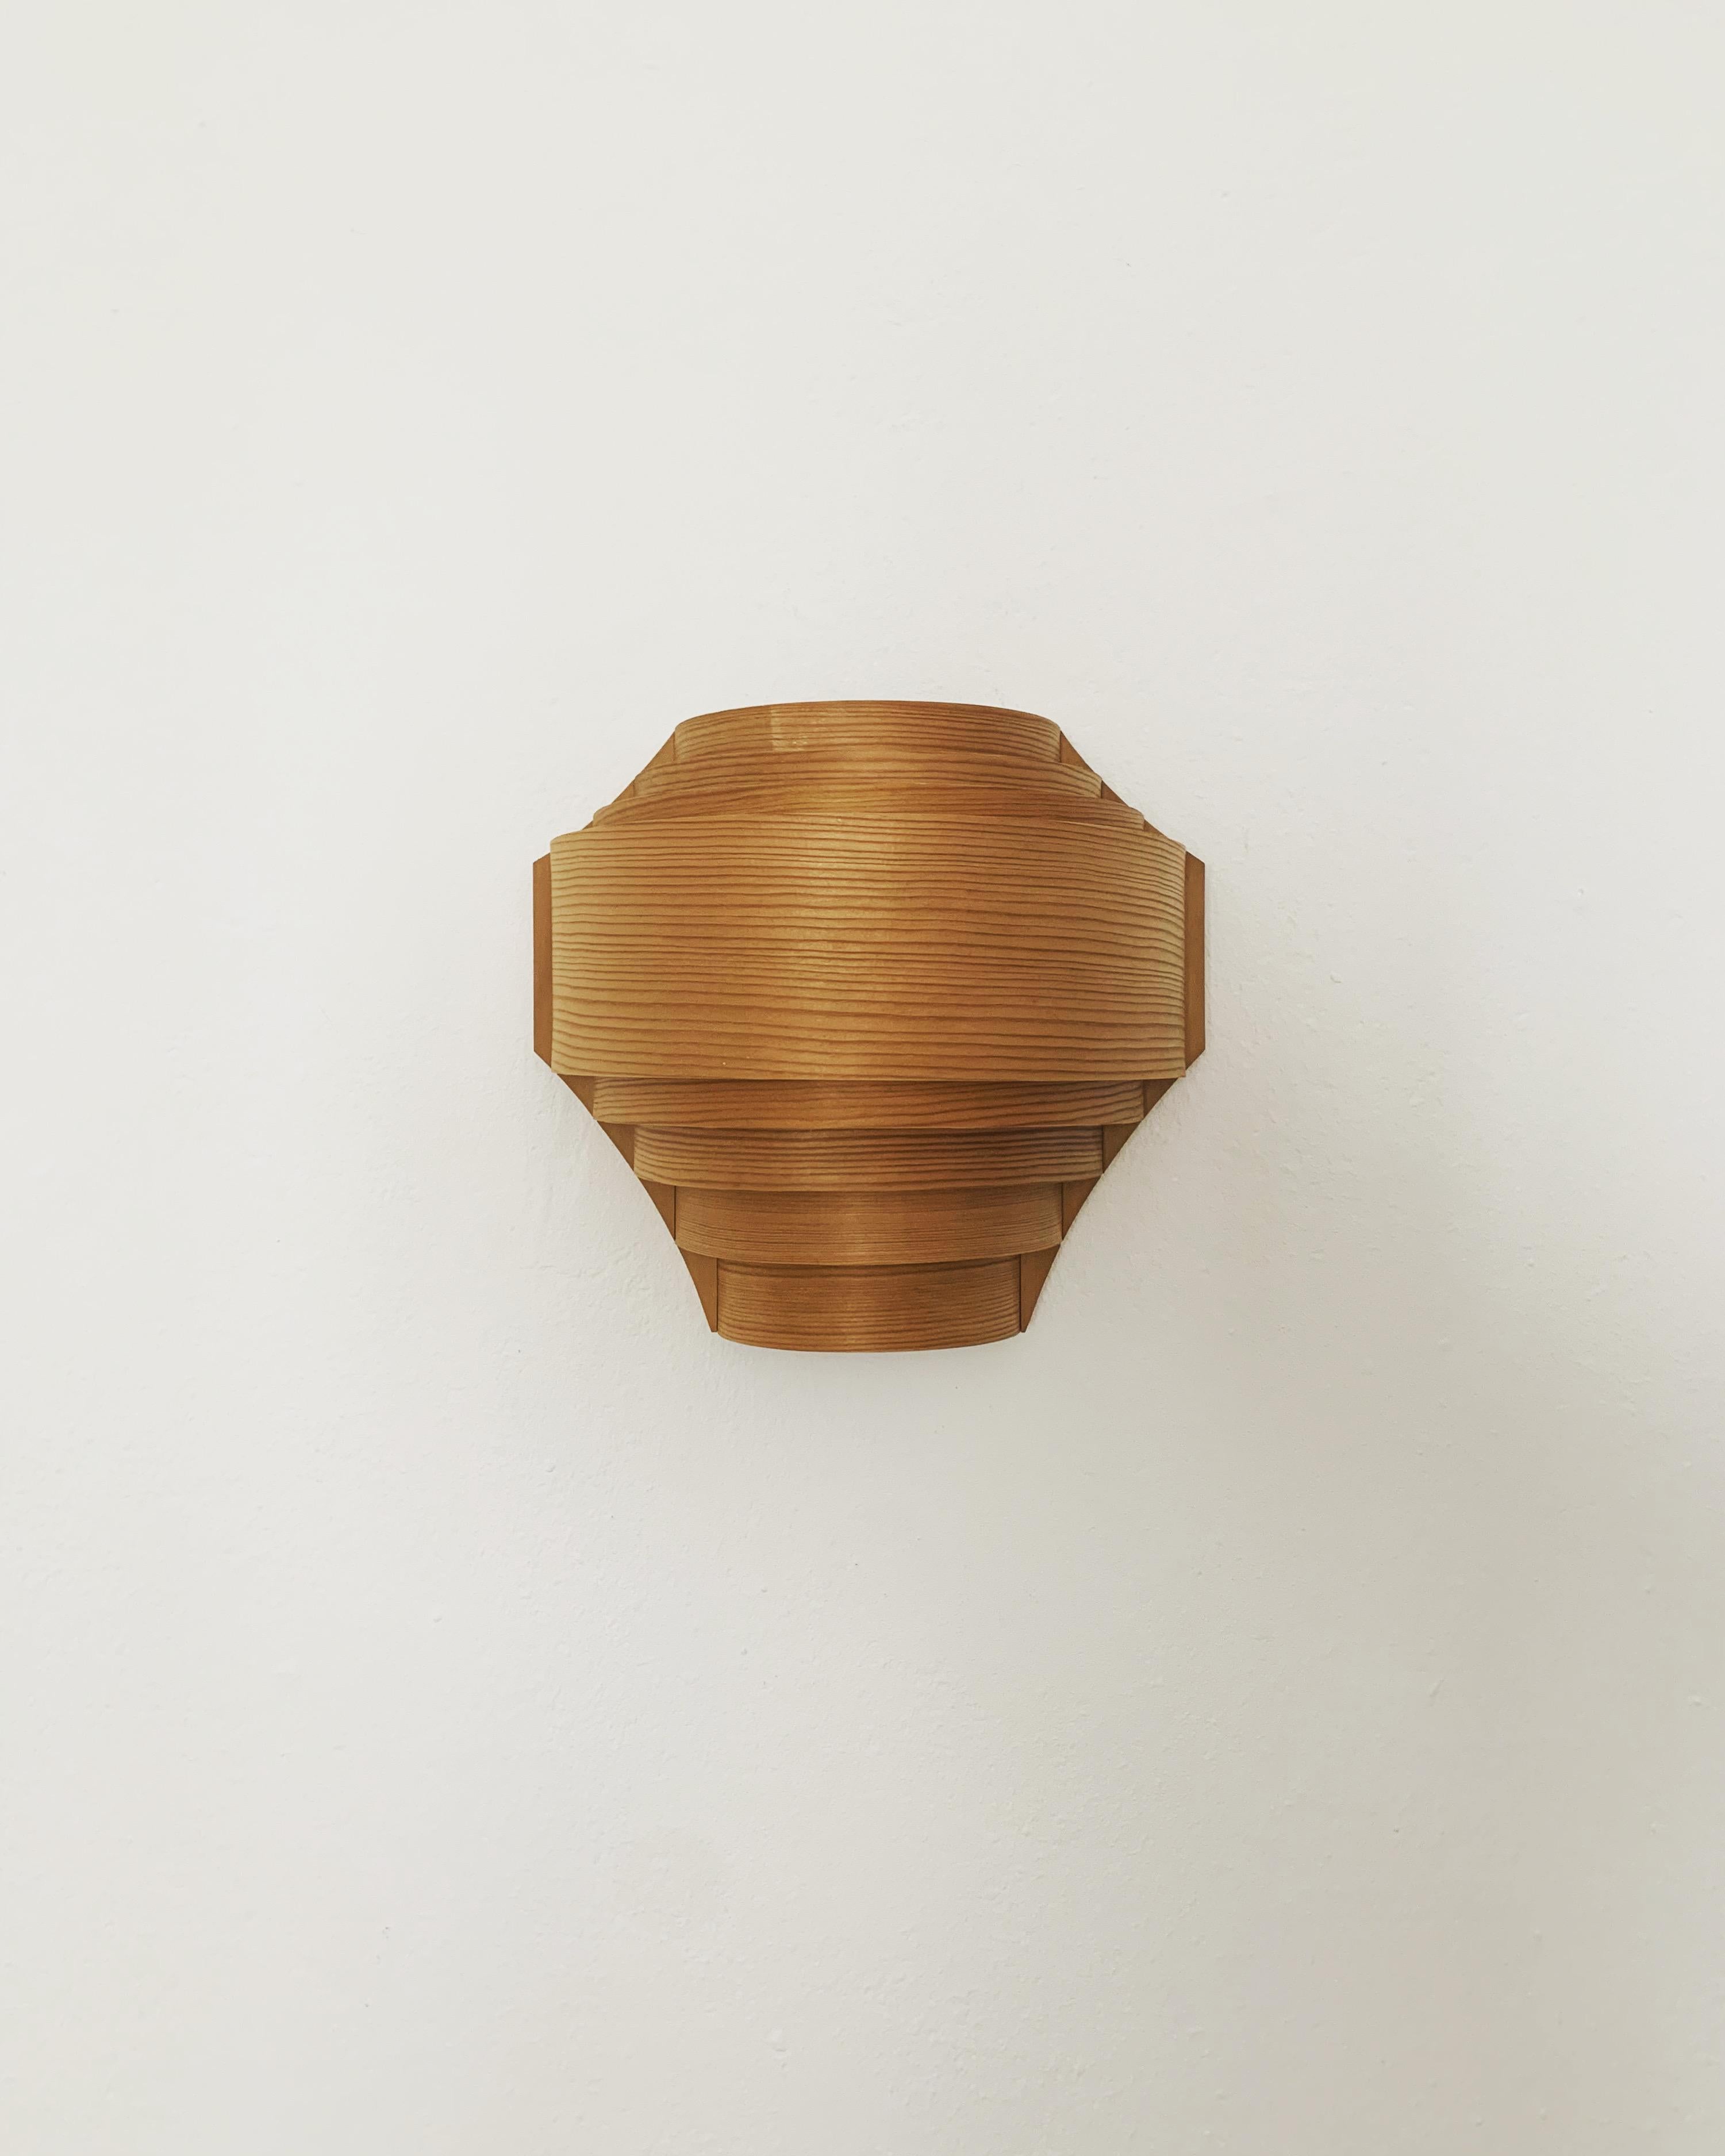 Exceptionally beautiful wooden wall lamp from the 1960s.
Very nice design and an asset to any home.
A spectacular play of light is created.

Condition:

Very good vintage condition with slight signs of wear consistent with age.
Very light